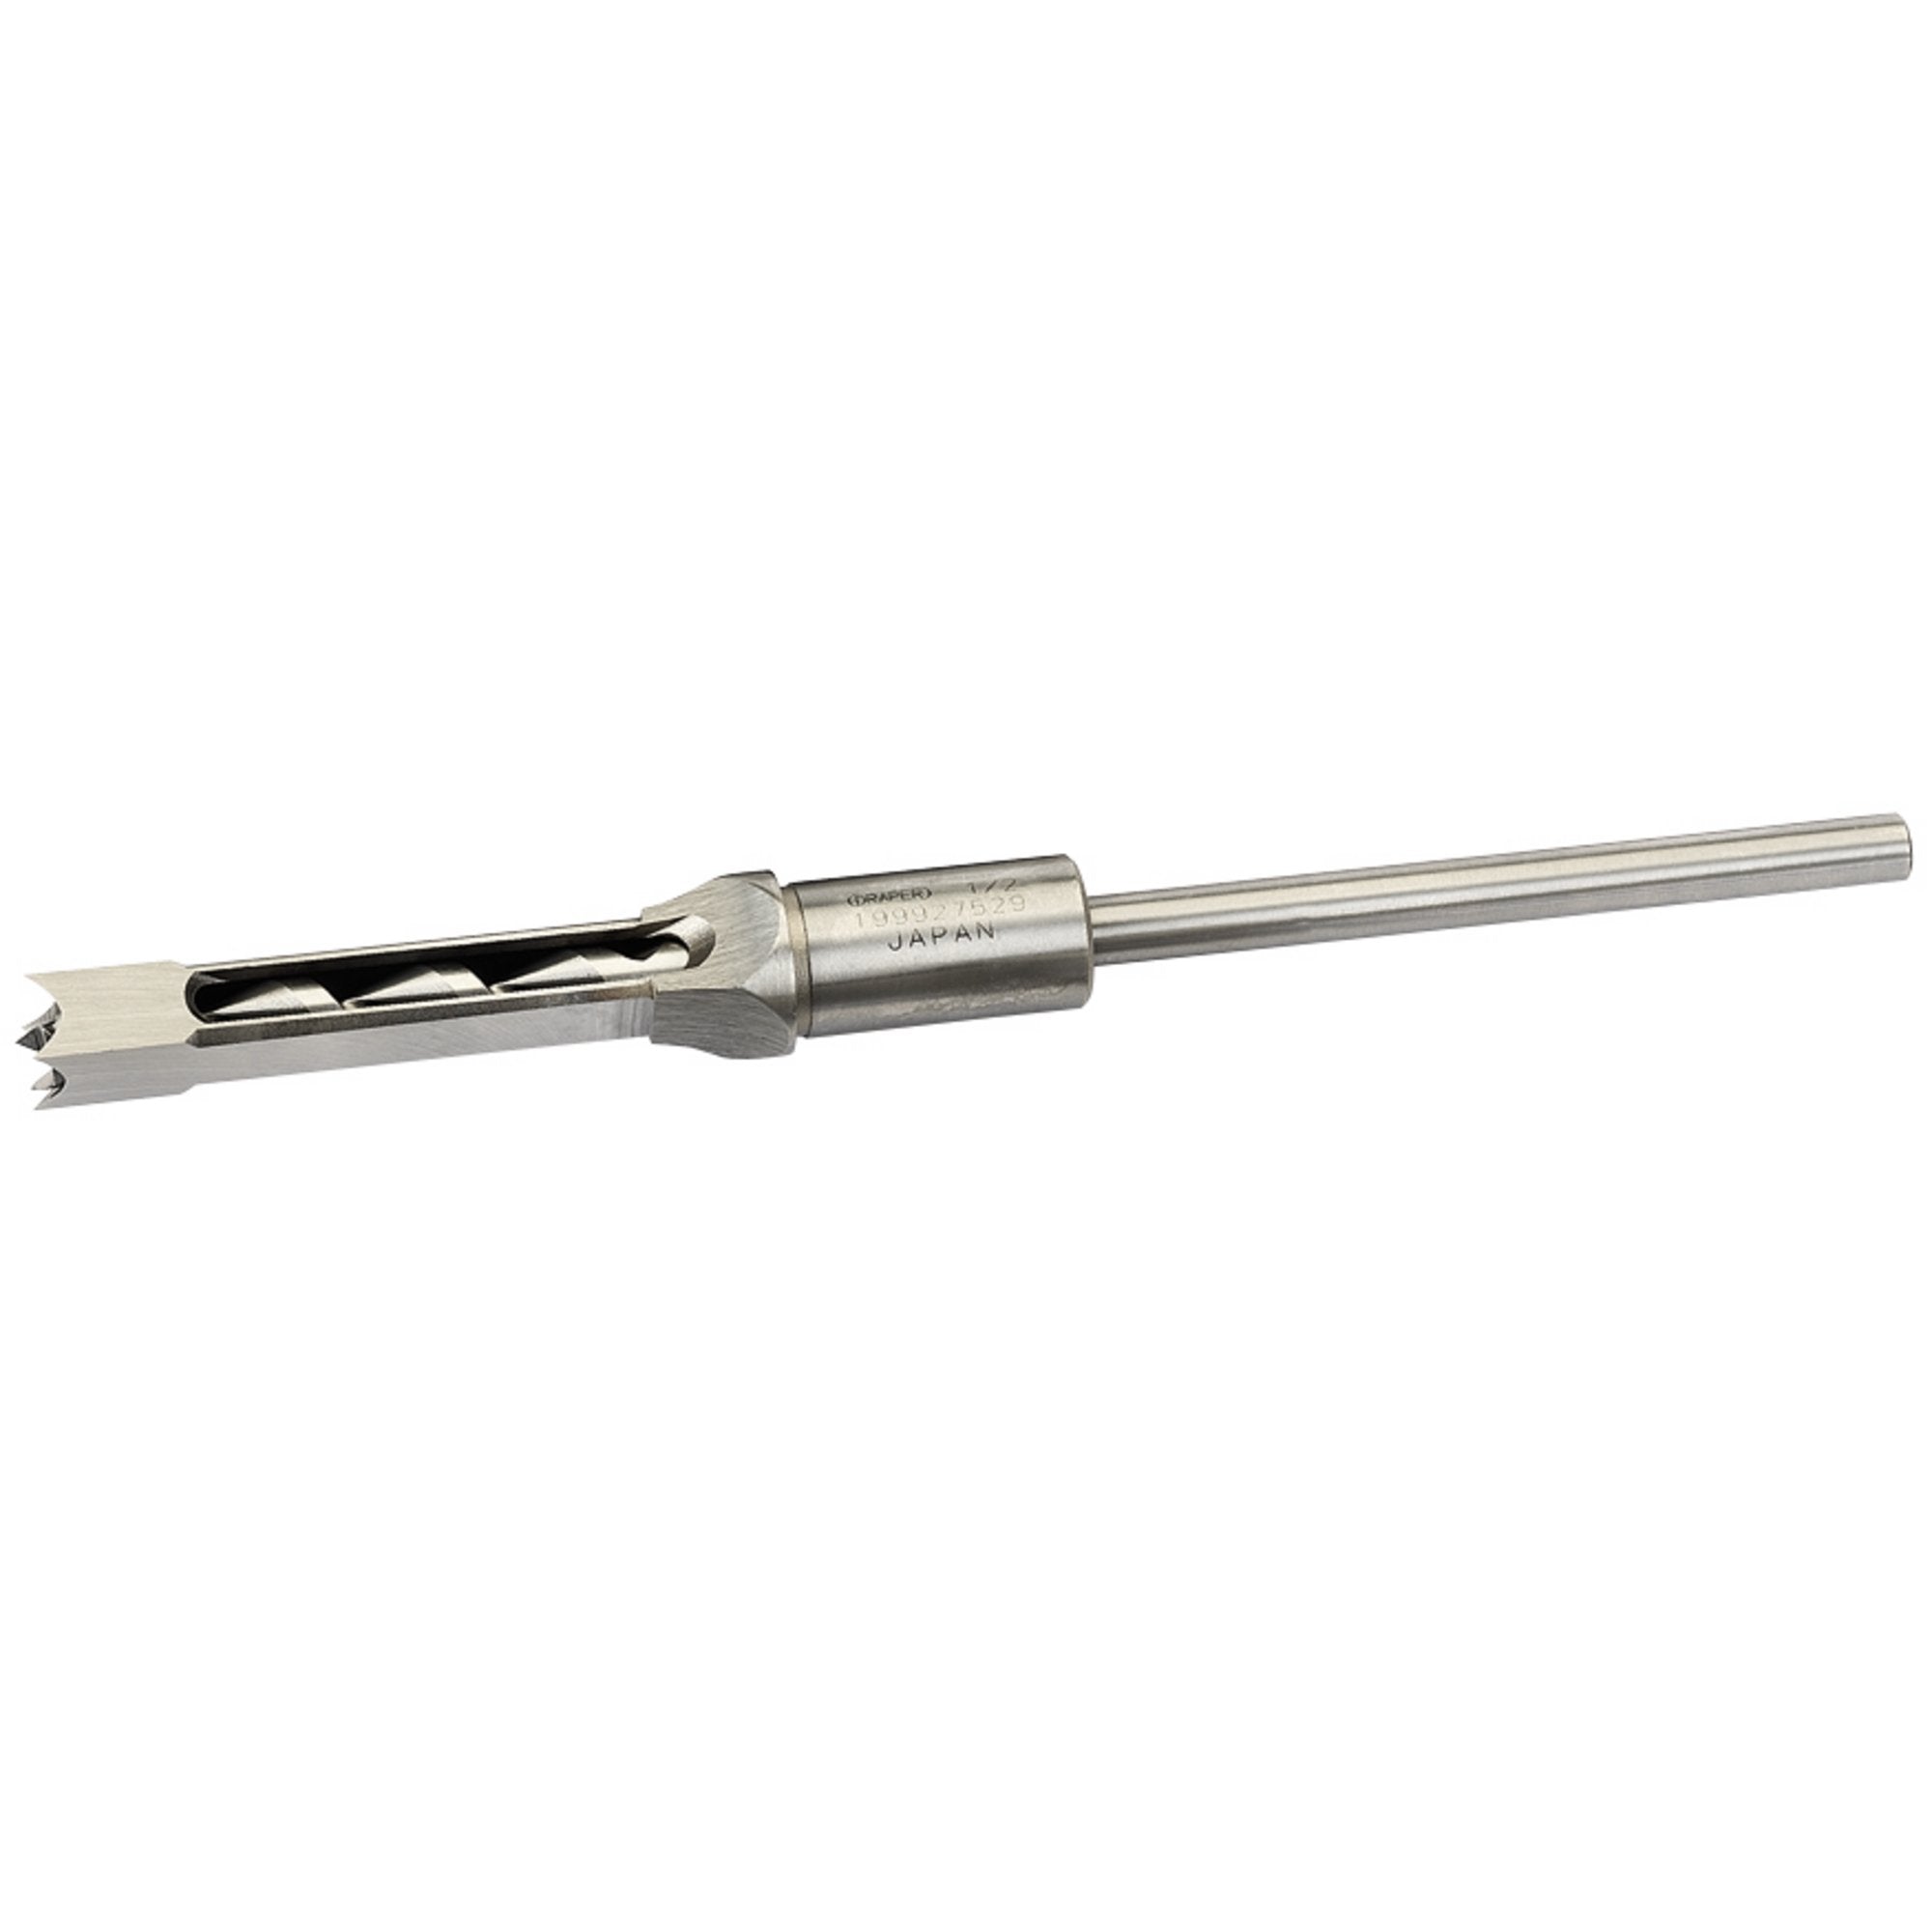 Draper 48056 Hollow Square Mortice Chisel with Bit, 1/2